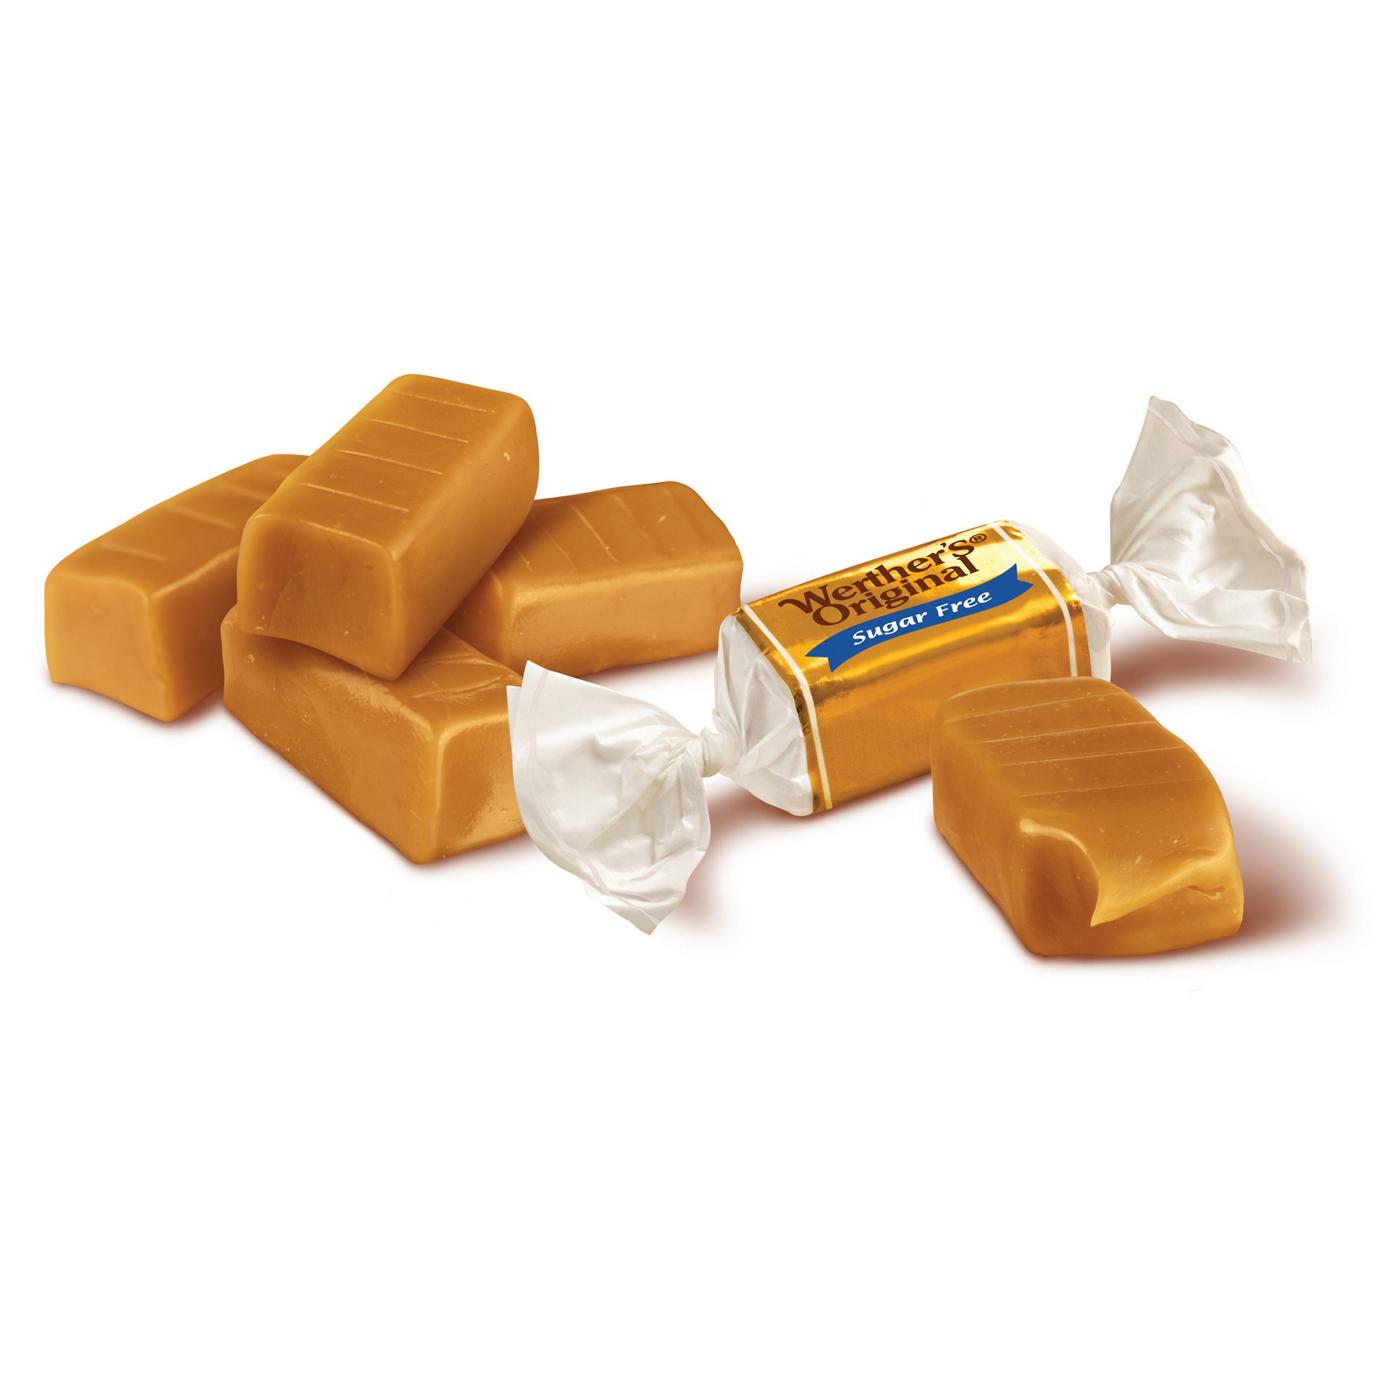 Werther's Original Sugar Free Chewy Caramels; image 6 of 6